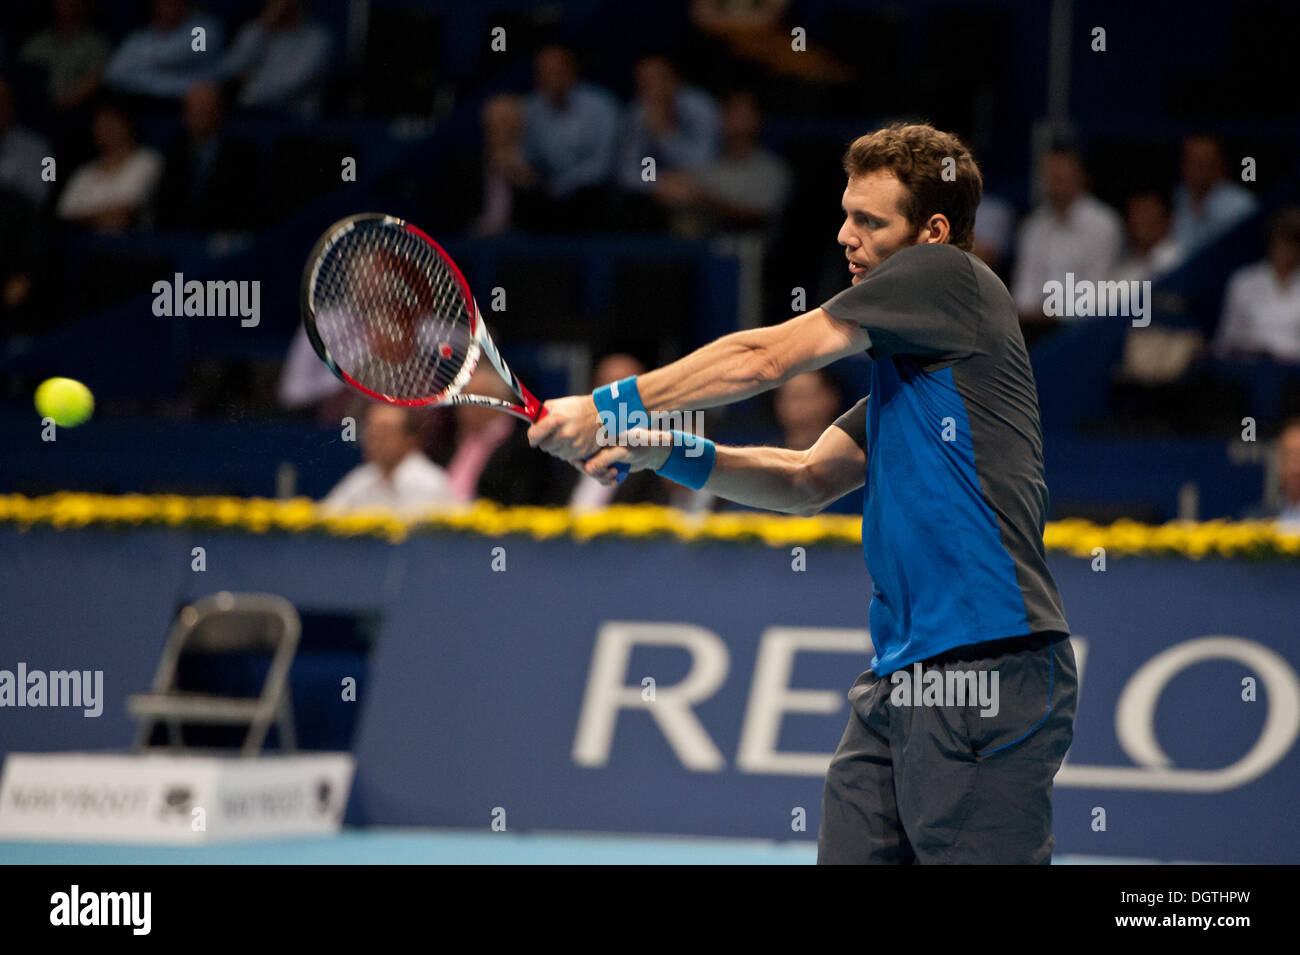 Basel, Switzerland. 25th Oct, 2013. Paul-Henri Mathieu (FRA) hits the ball with a backhand during a match of the quarter finals of the Swiss Indoors at St. Jakobshalle on Friday. Photo: Miroslav Dakov/ Alamy Live News Stock Photo